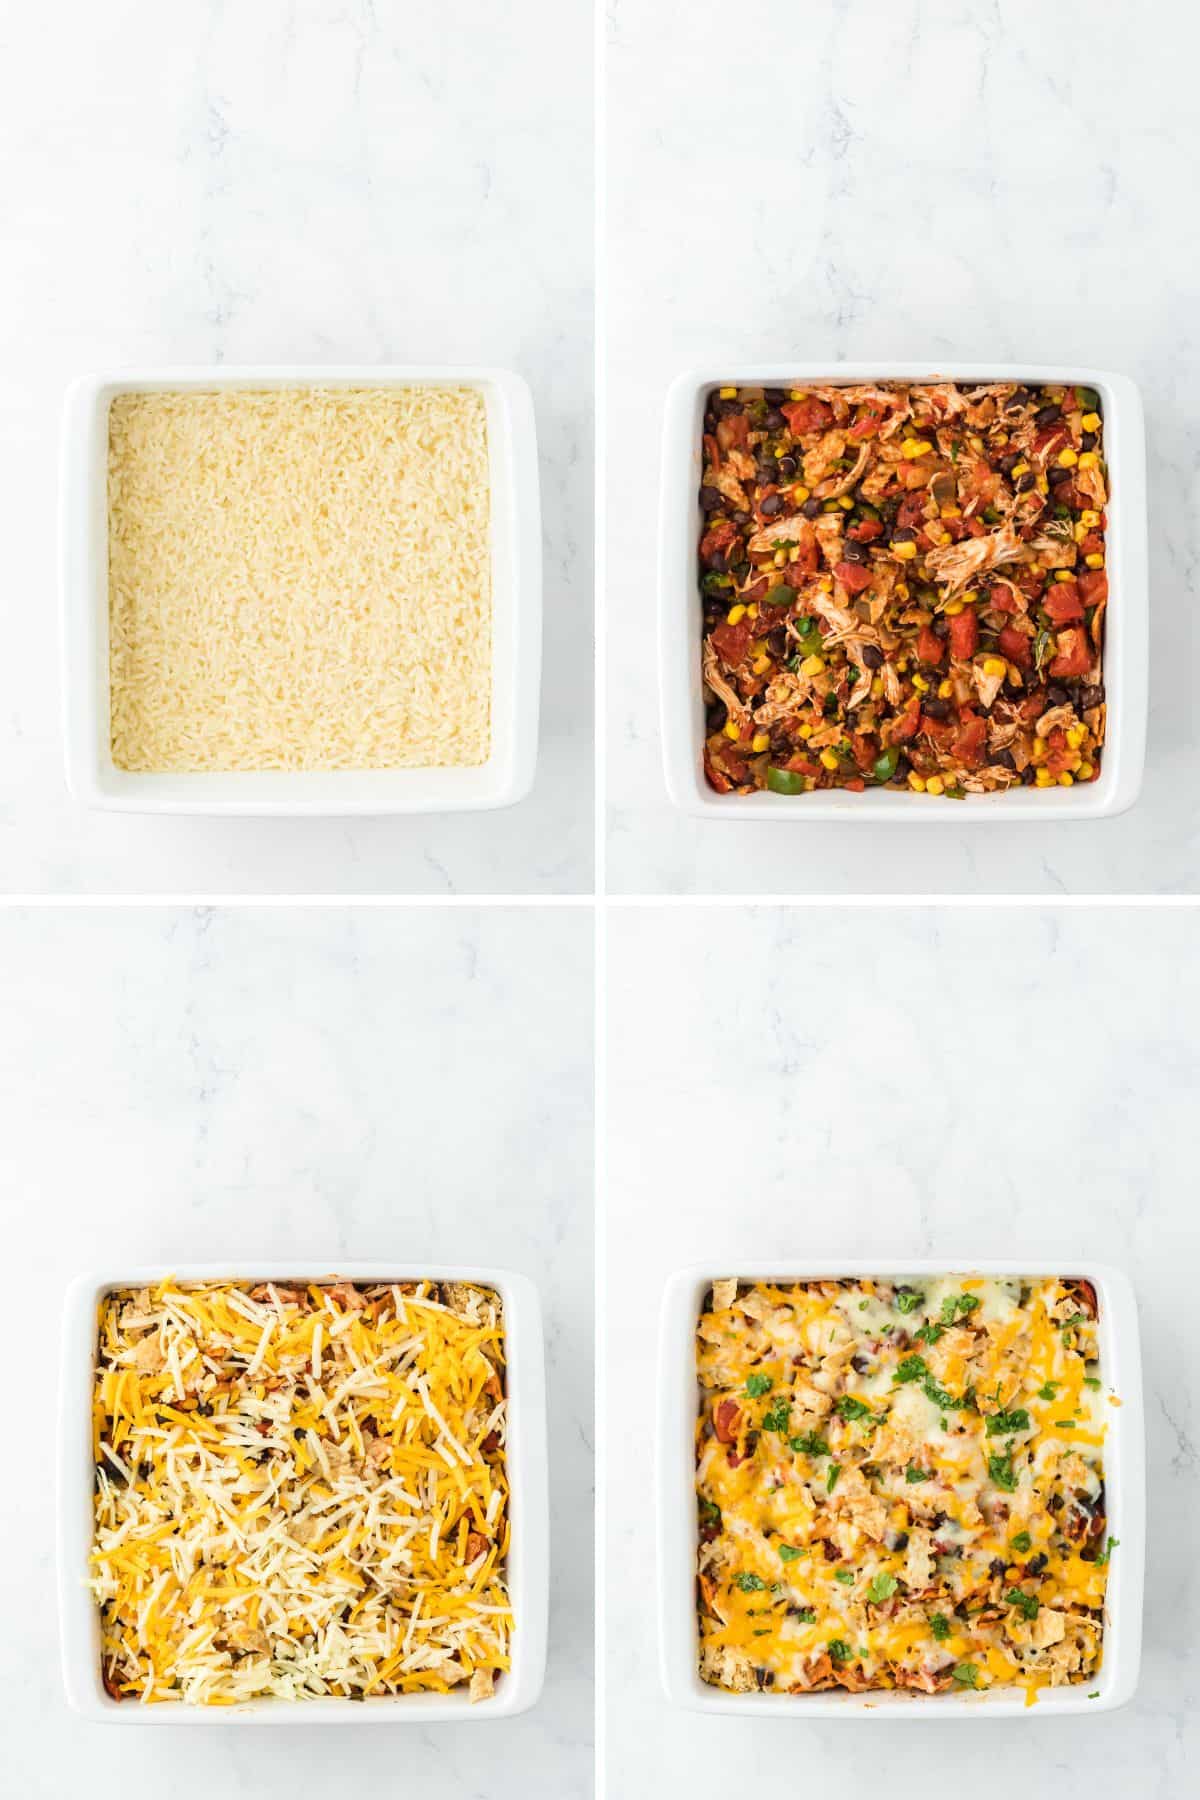 A step by step image collage on how to make Southwestern Chicken Casserole with adding the chicken mixture to the rice, topping it with cheese, and baking it